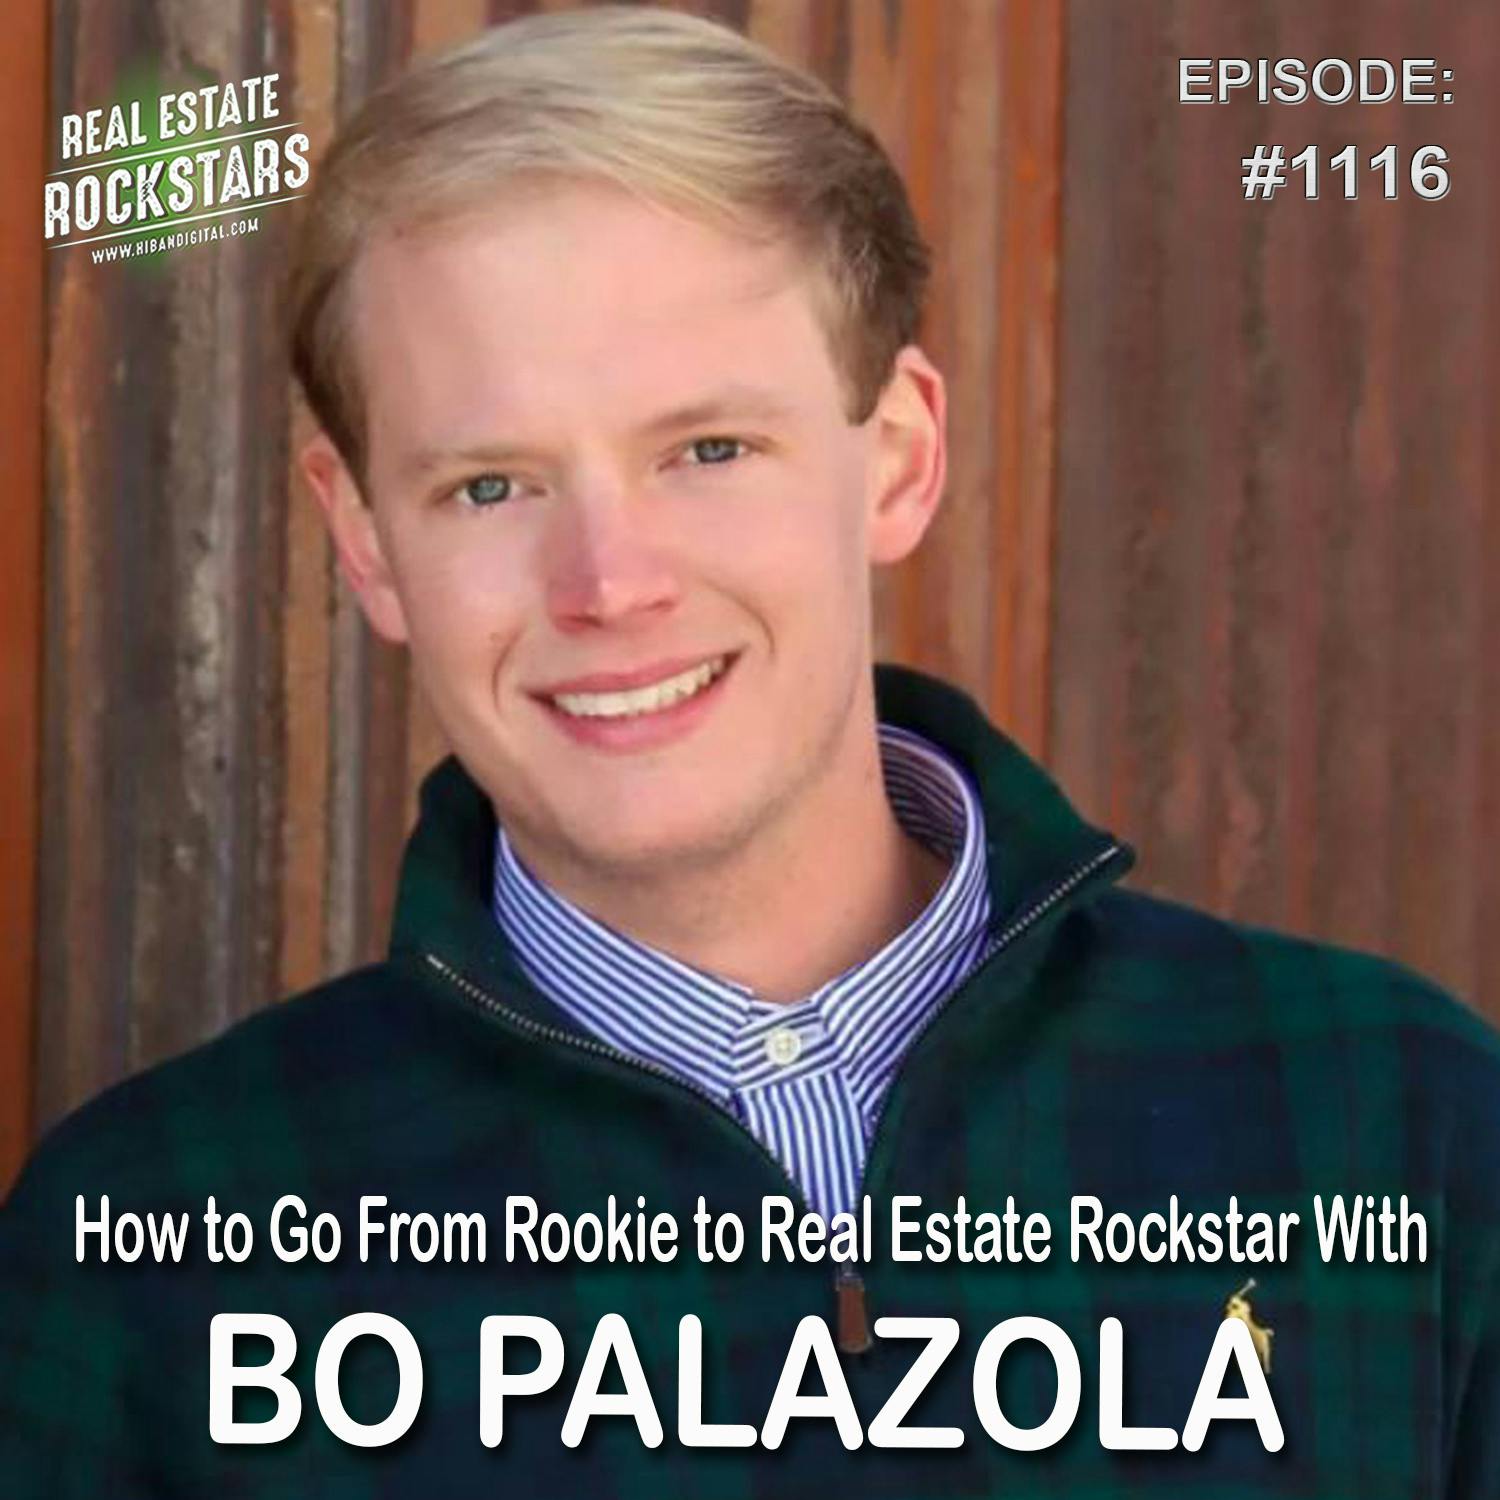 1116: How to Go From Rookie to Real Estate Rockstar With Bo Palazola